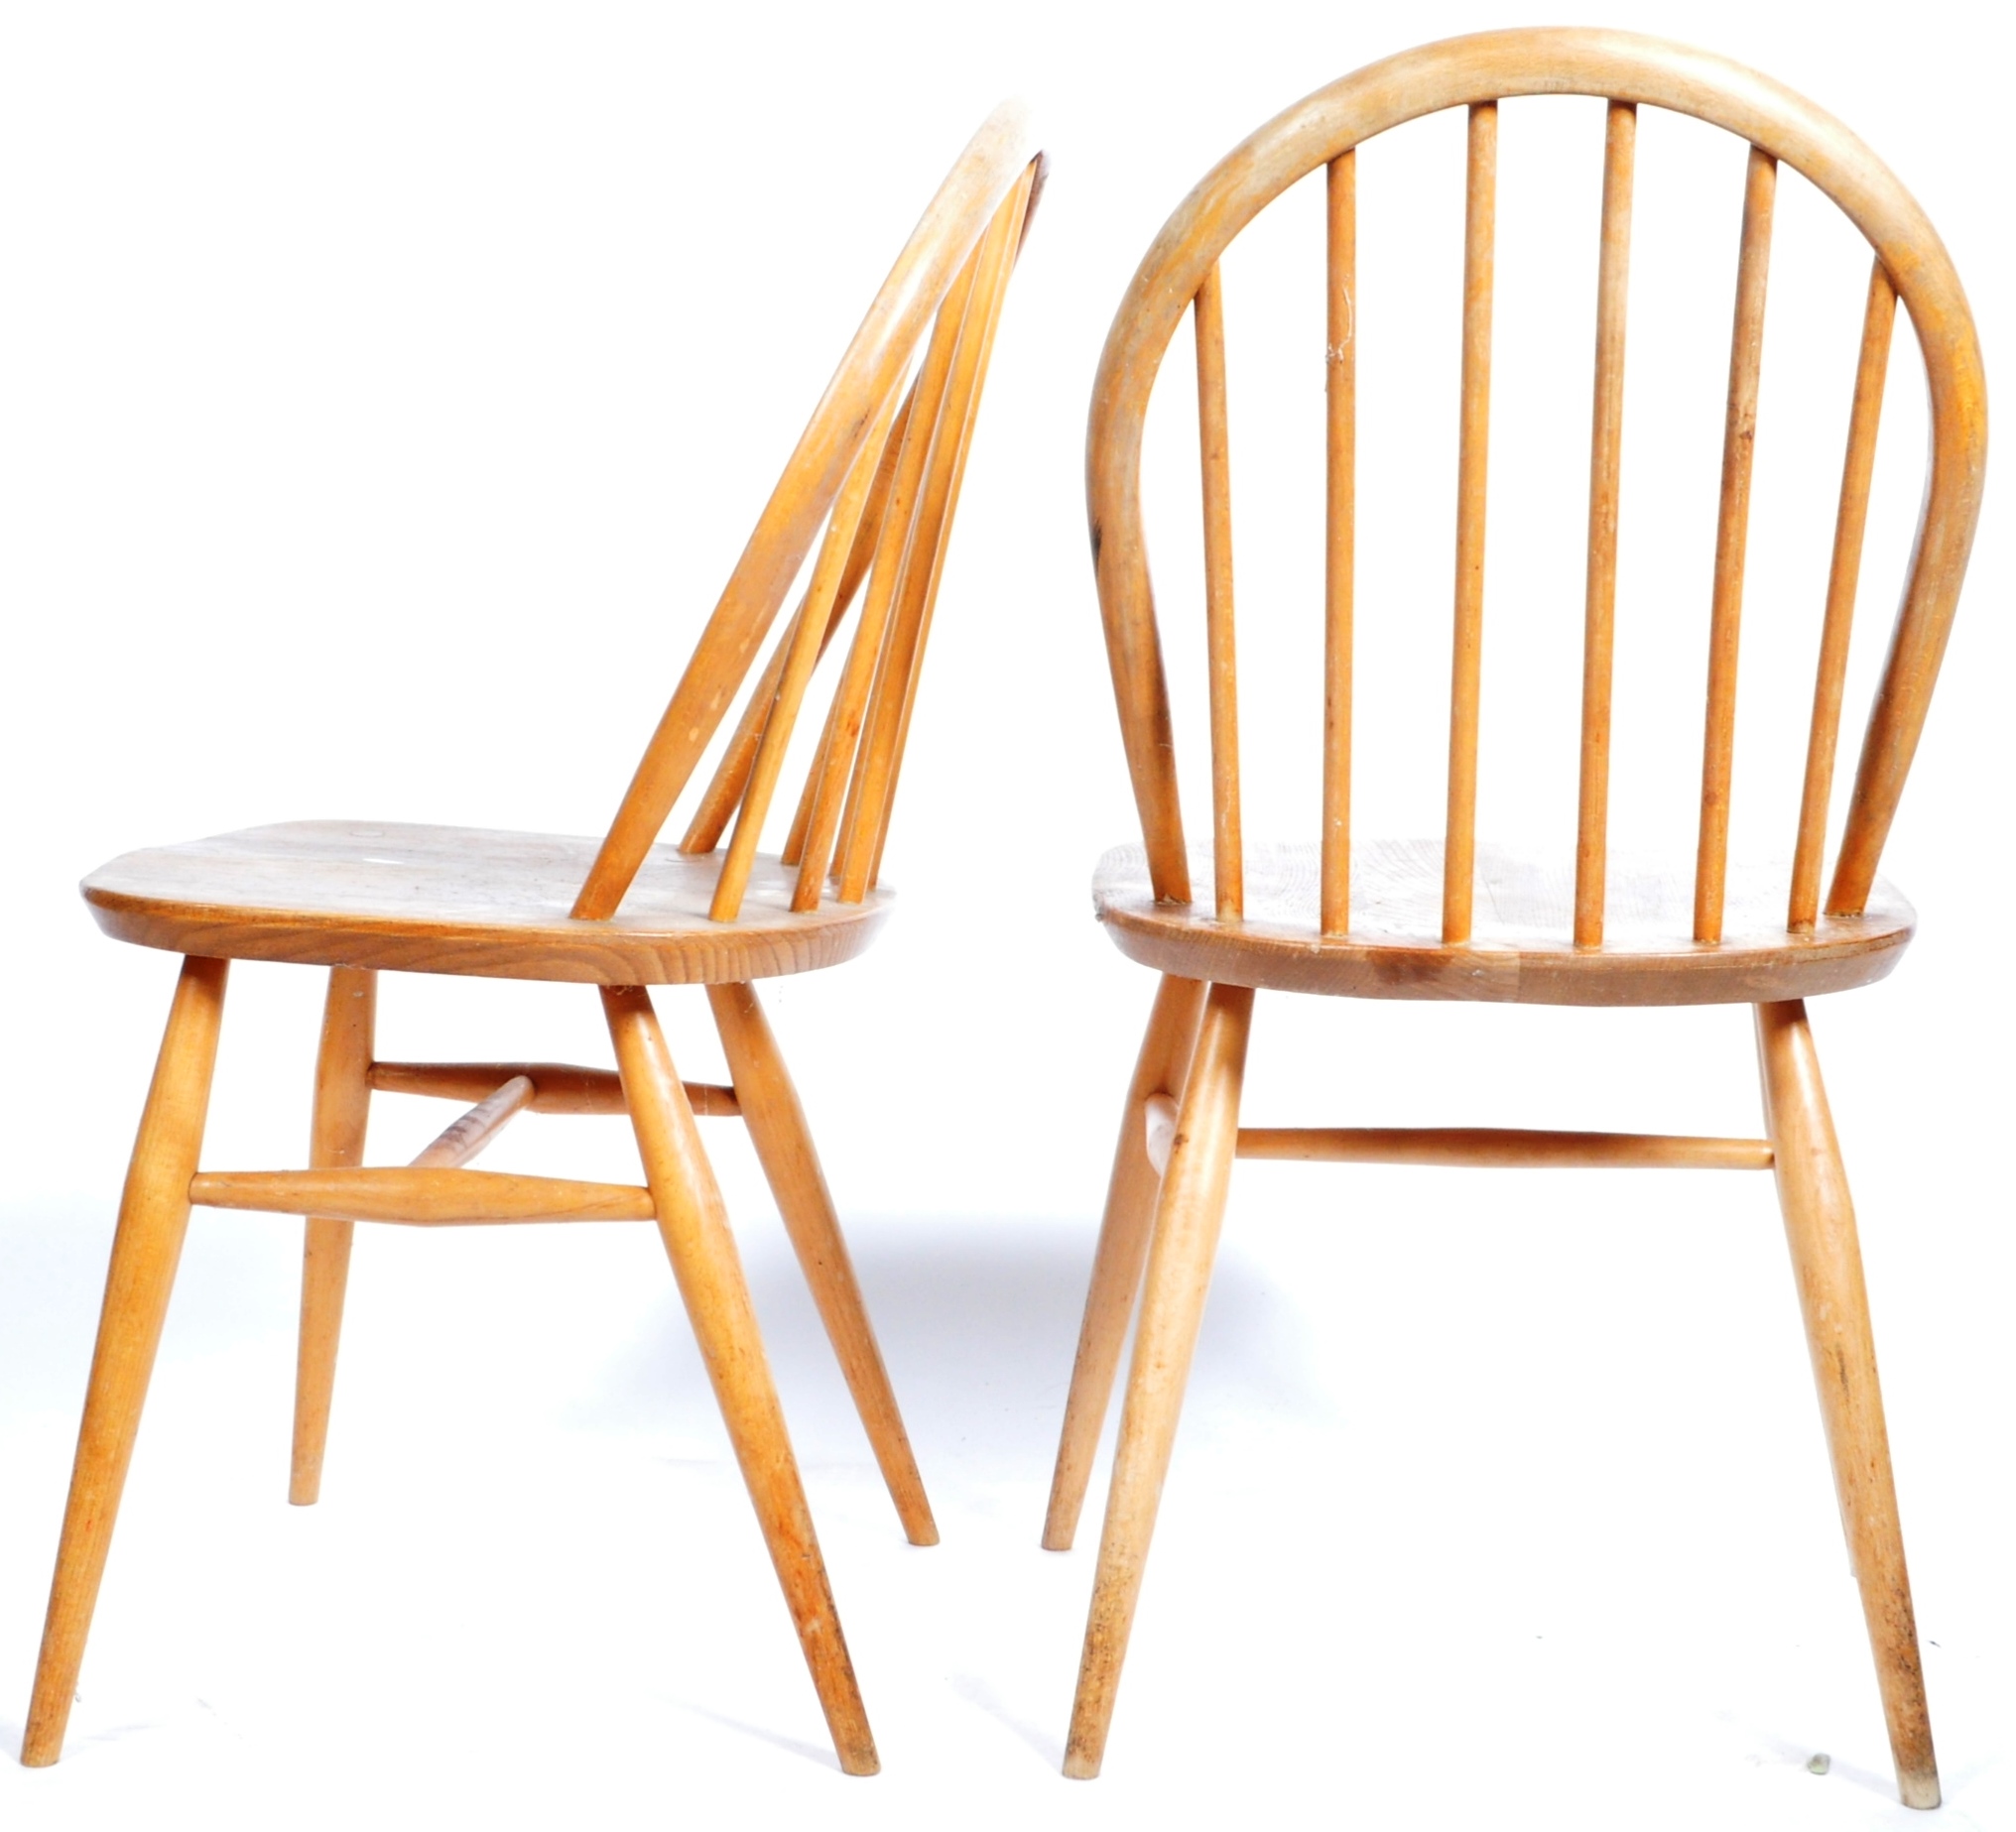 LUCIAN ERCOLANI - ERCOL - SET OF MODEL 370 DINING CHAIRS - Image 6 of 8